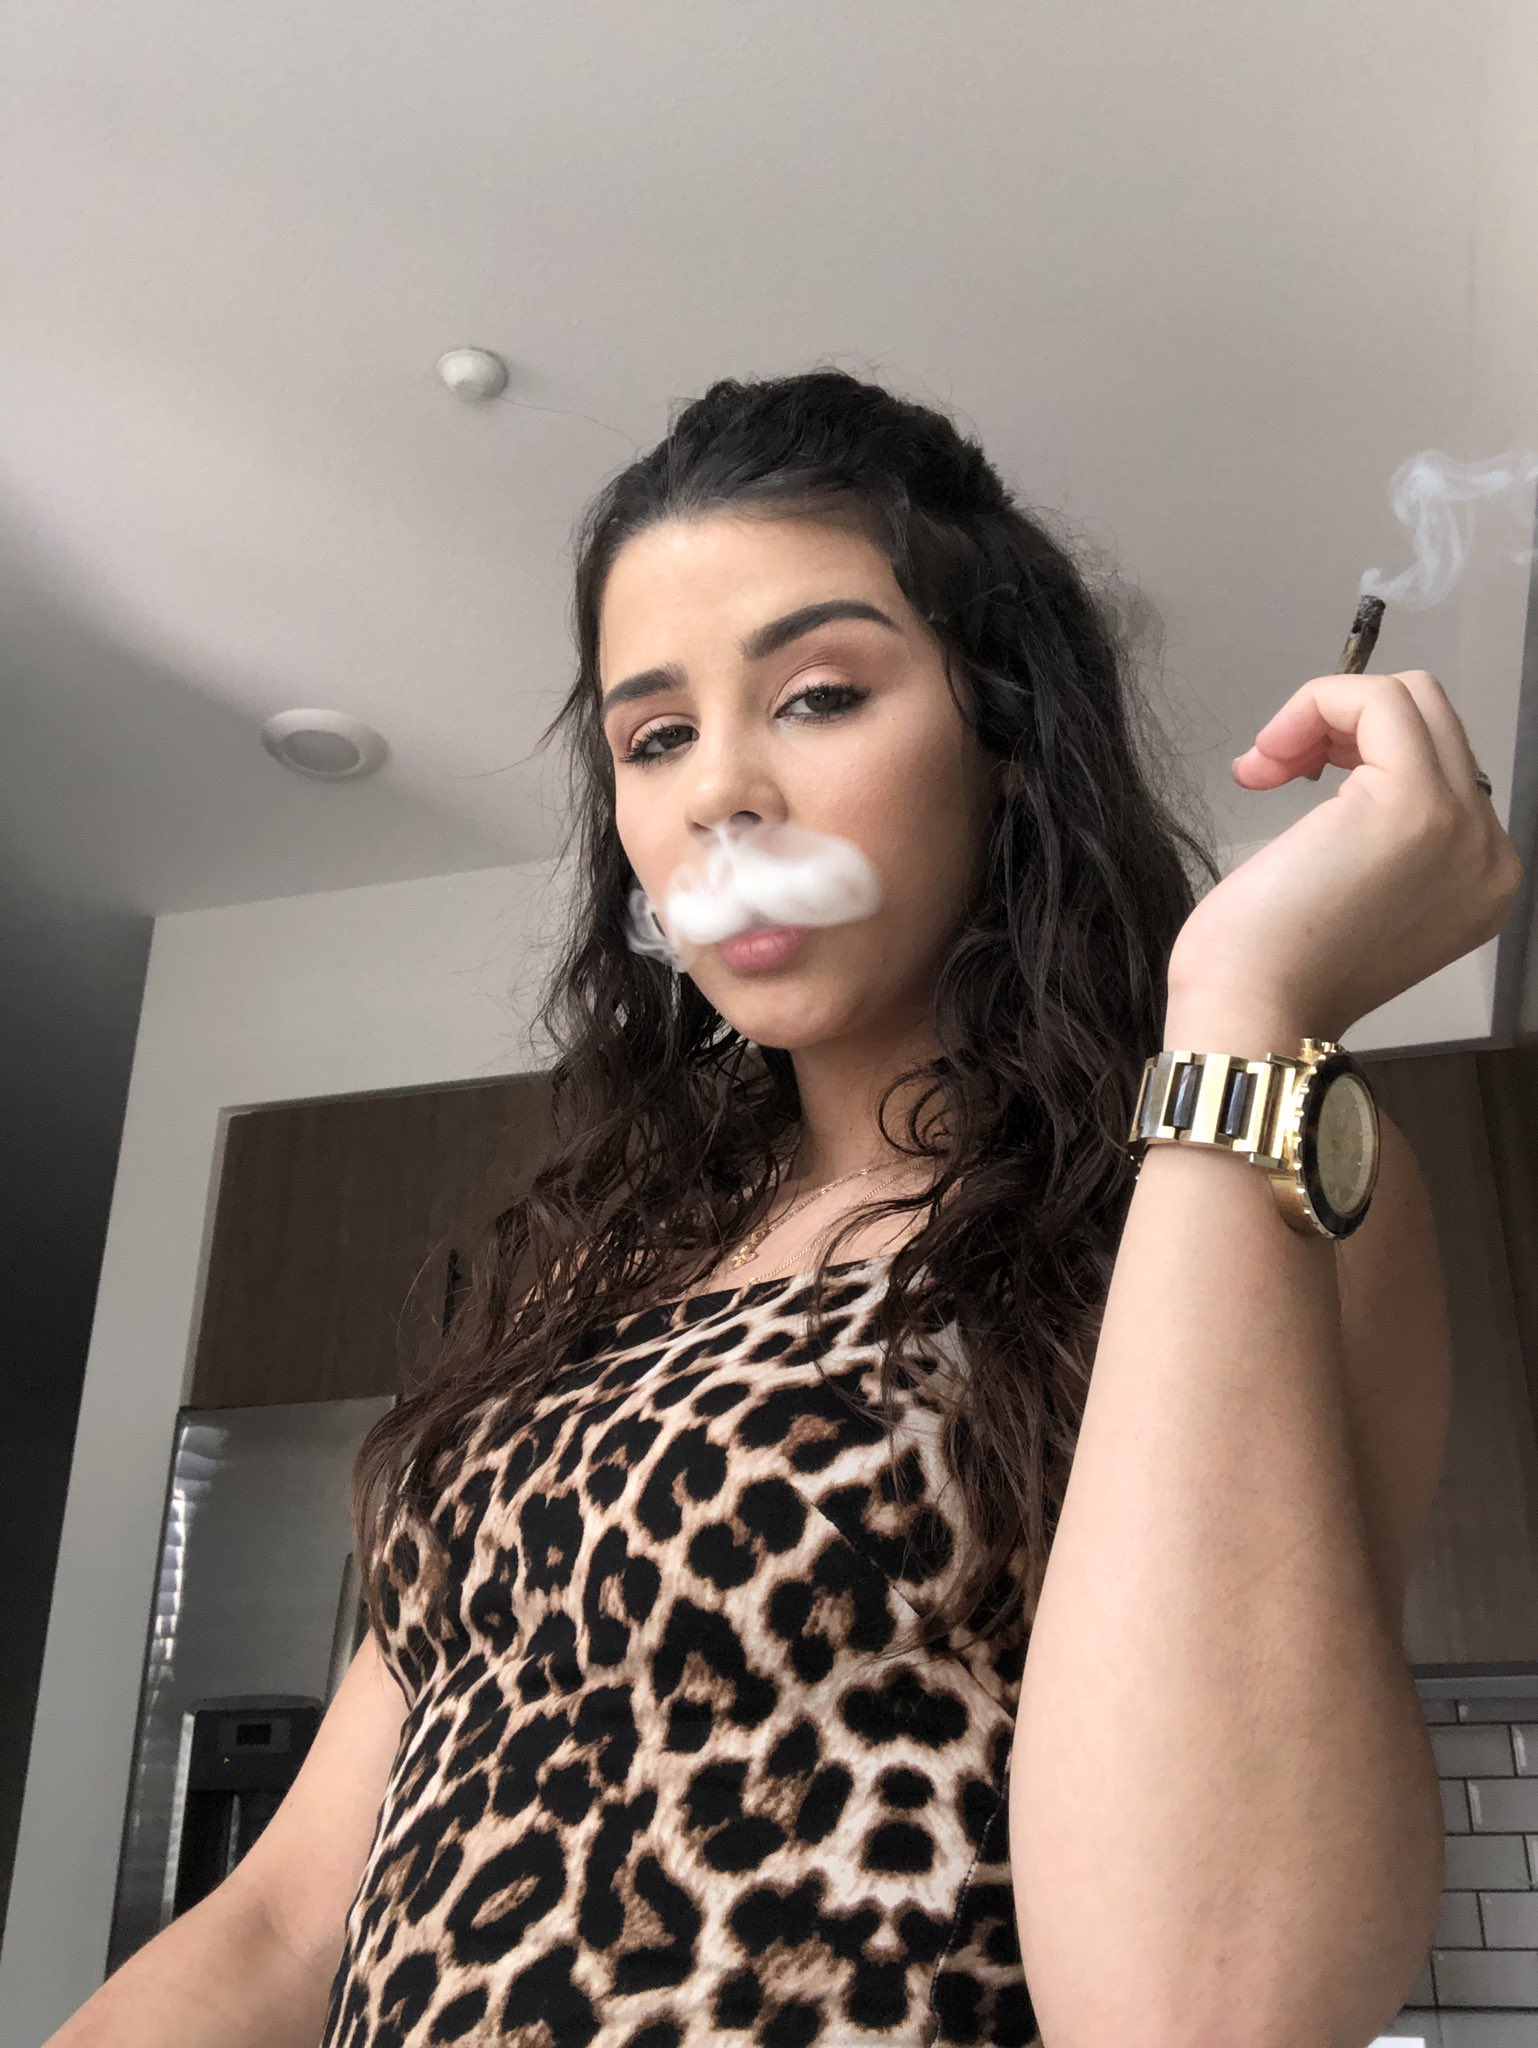 Kylie Rocket on X: Smoking with Kylie - Q & A ✨🚀🔥  t.cogIsW0Fch1h YOU MUST WATCHH!!! 😍🤩 it's on my OnlyFans NOW!!!!  t.copjGrboiCMs  X